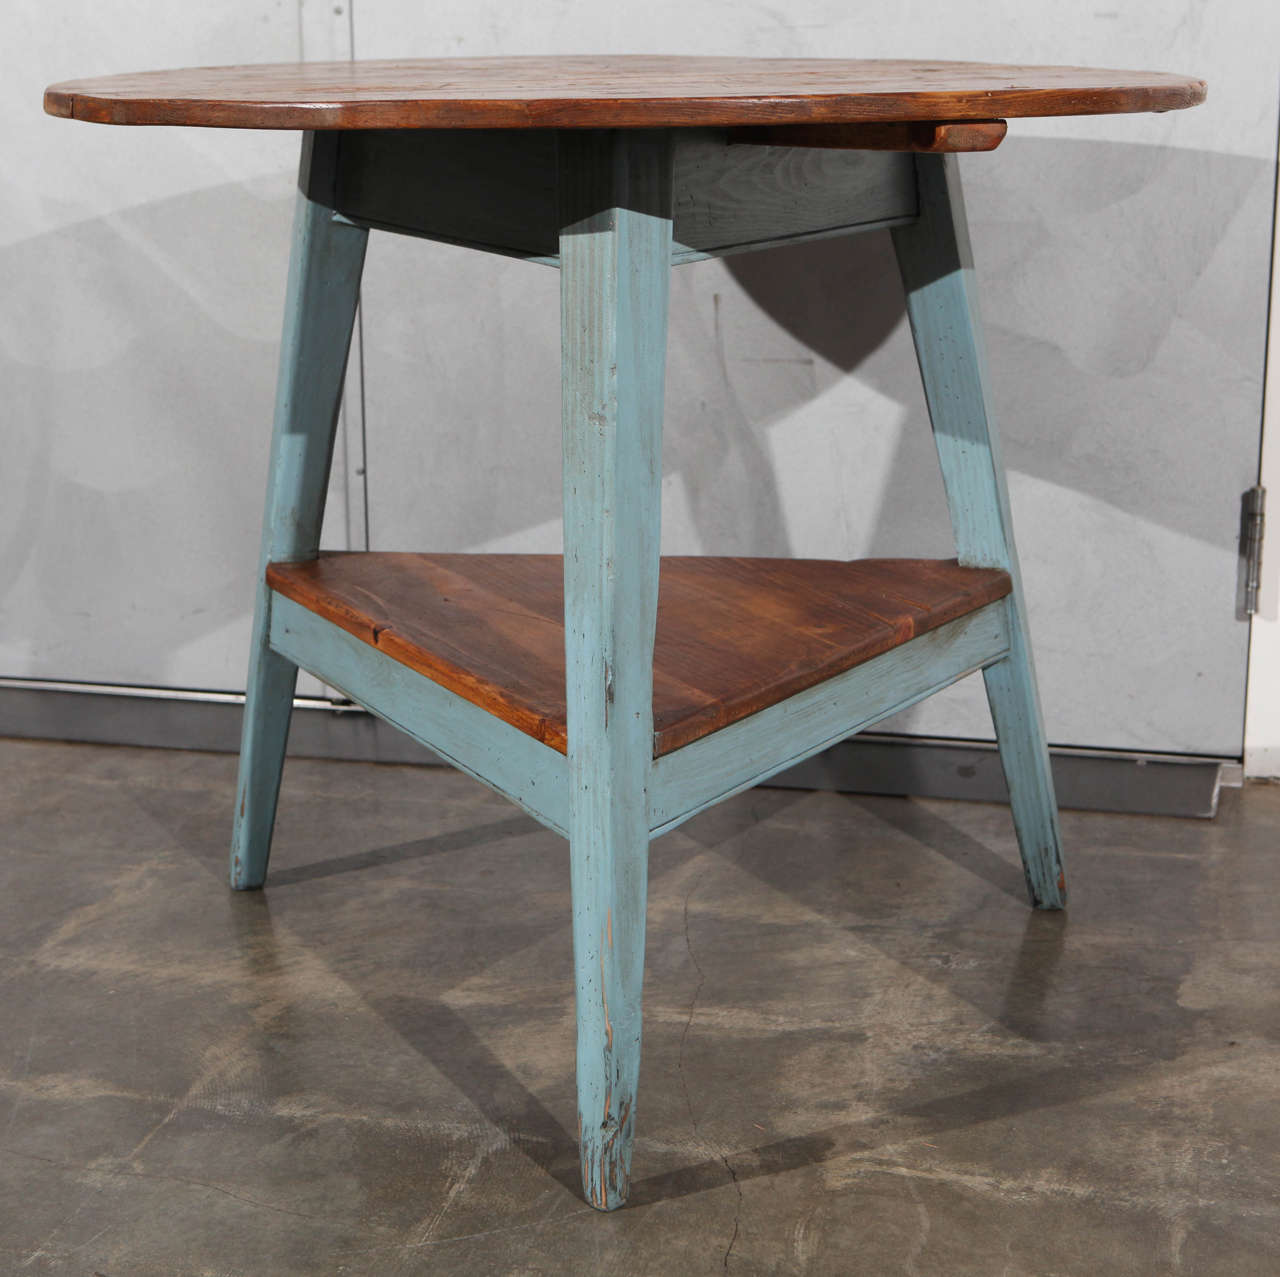 20th Century English Cricket Table with Blue Painted Legs